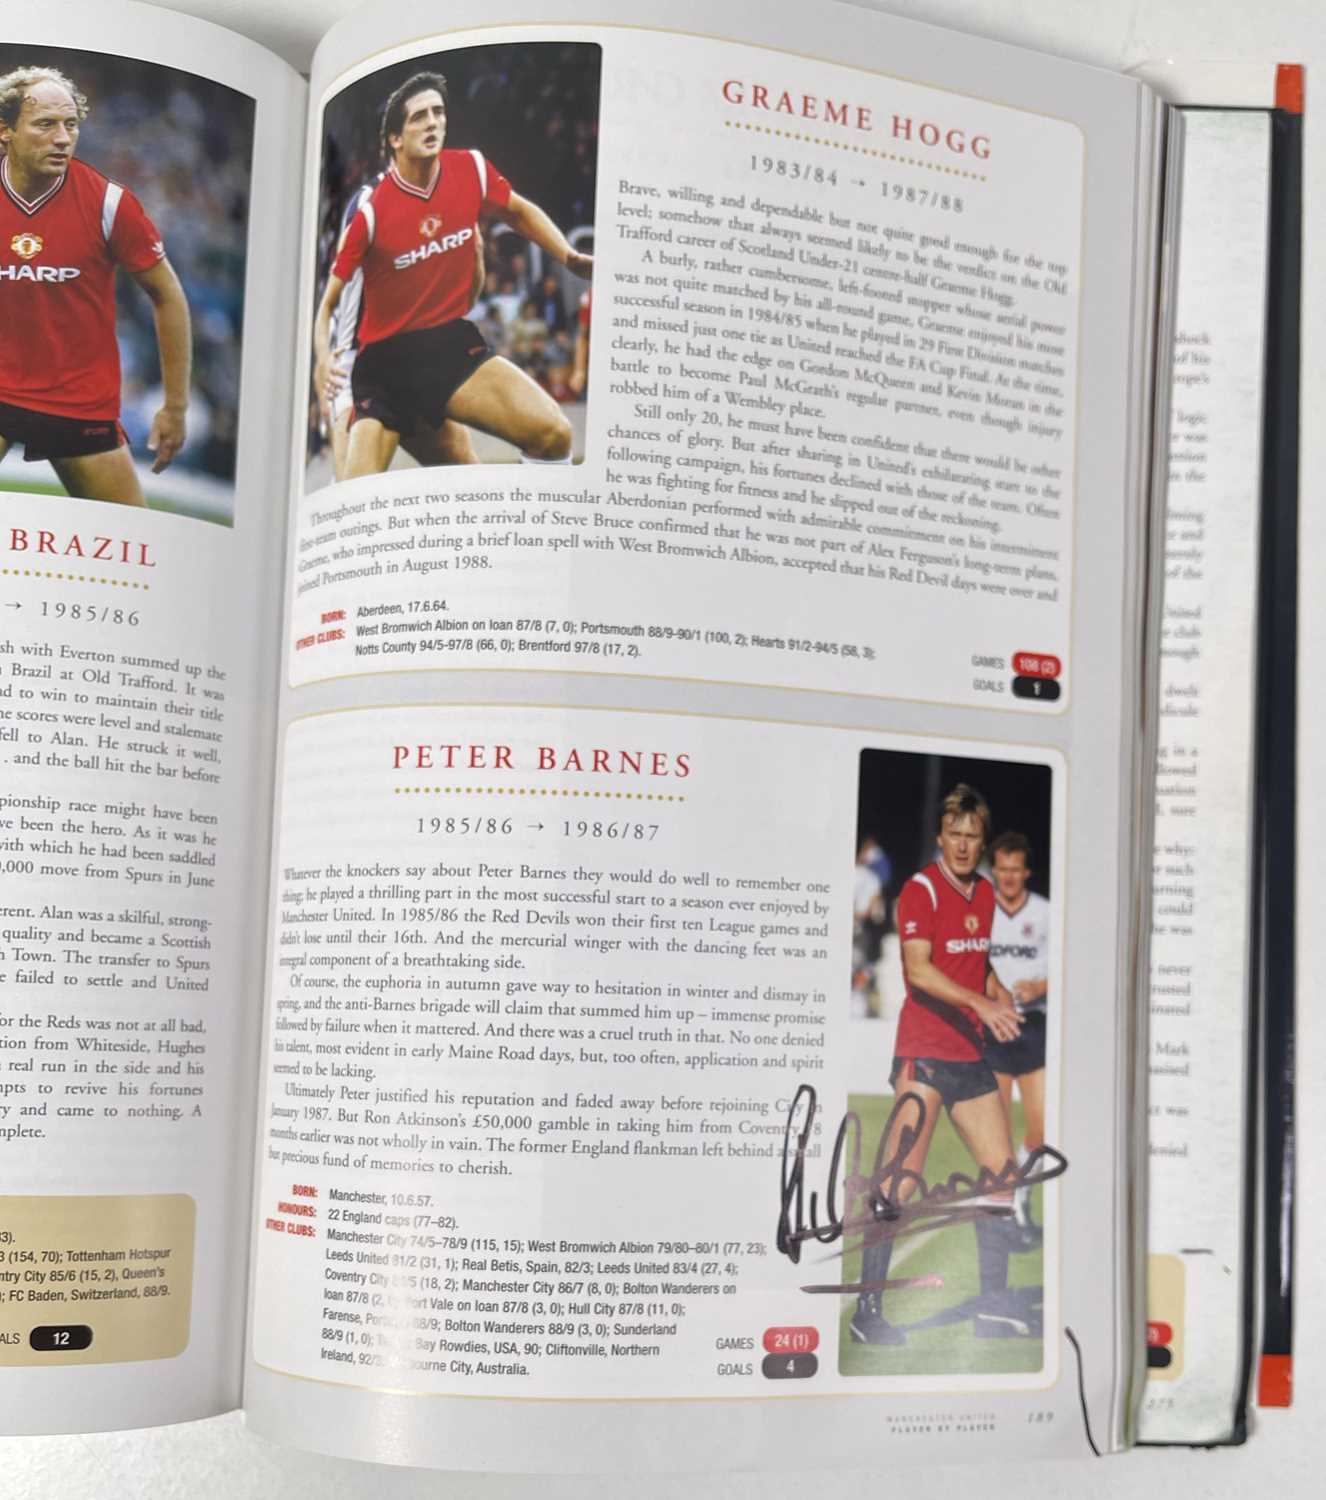 FOOTBALL MEMORABILIA - MANCHESTER UNITED MULTI SIGNED 'PLAYER BY PLAYER' BOOK. - Image 28 of 50